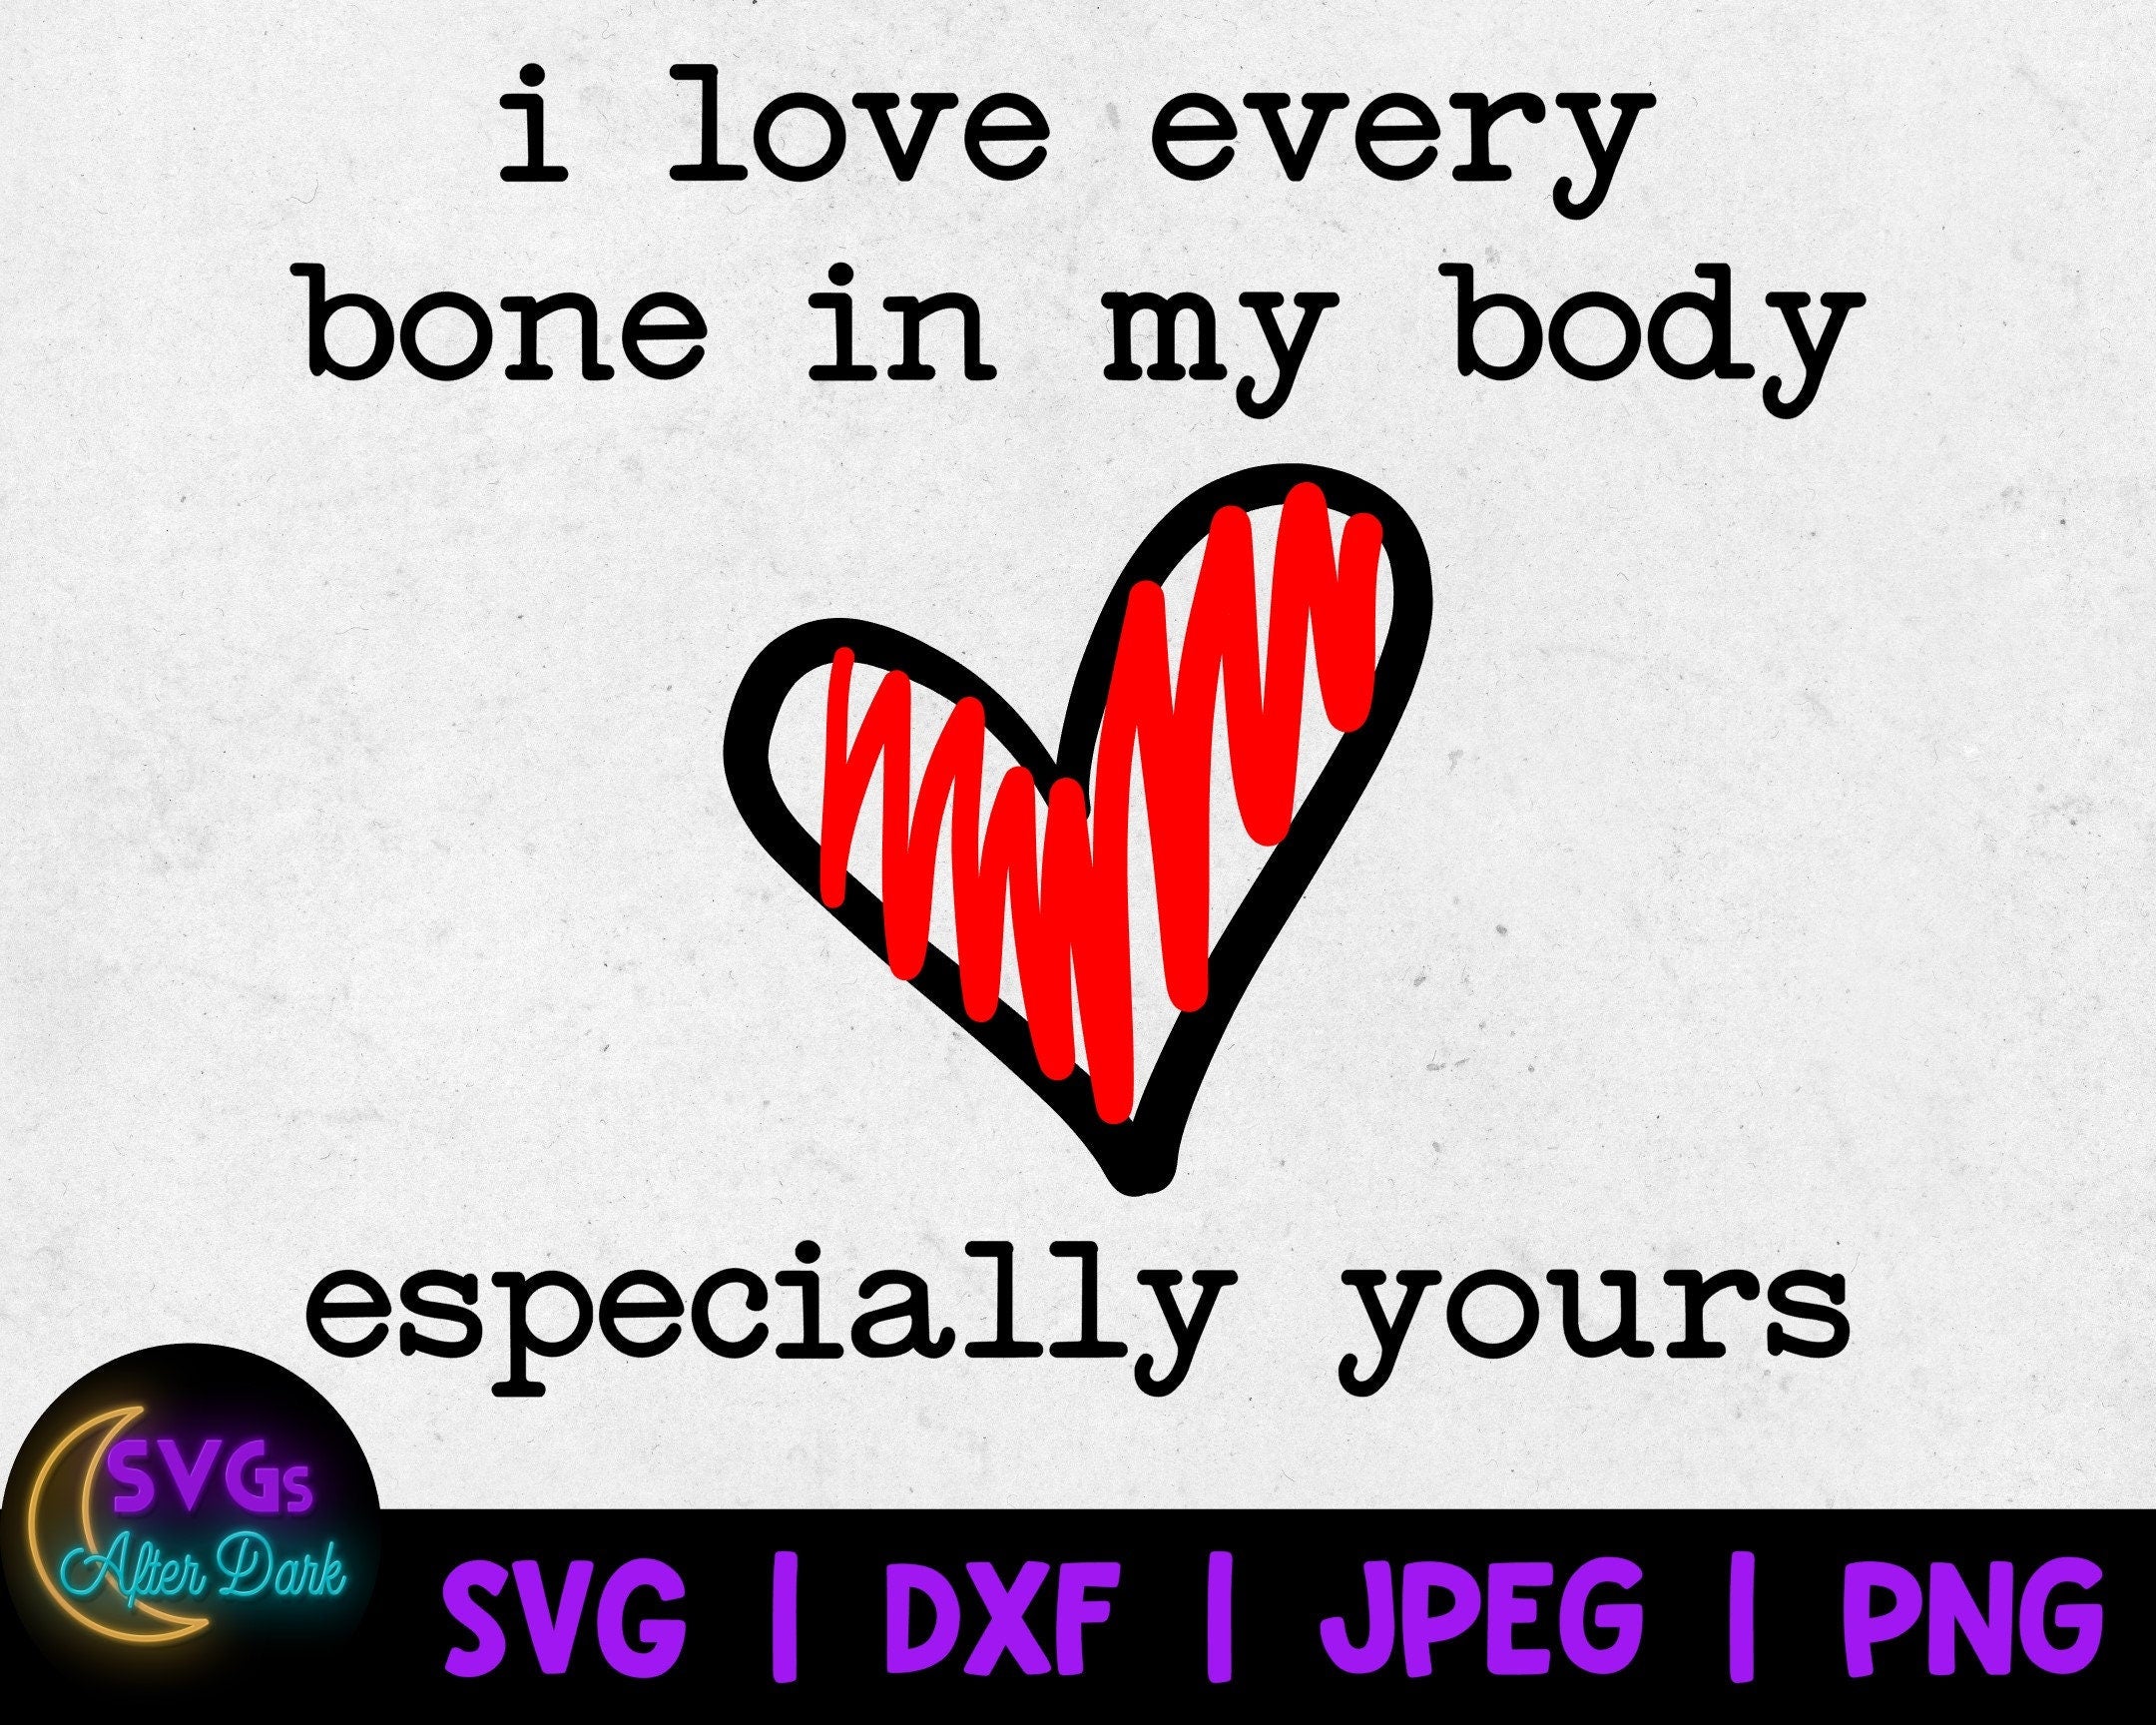 NSFW SVG - Love Every Bone in my Body Especially Yours SVG - Dirty Valentine's Day Svg